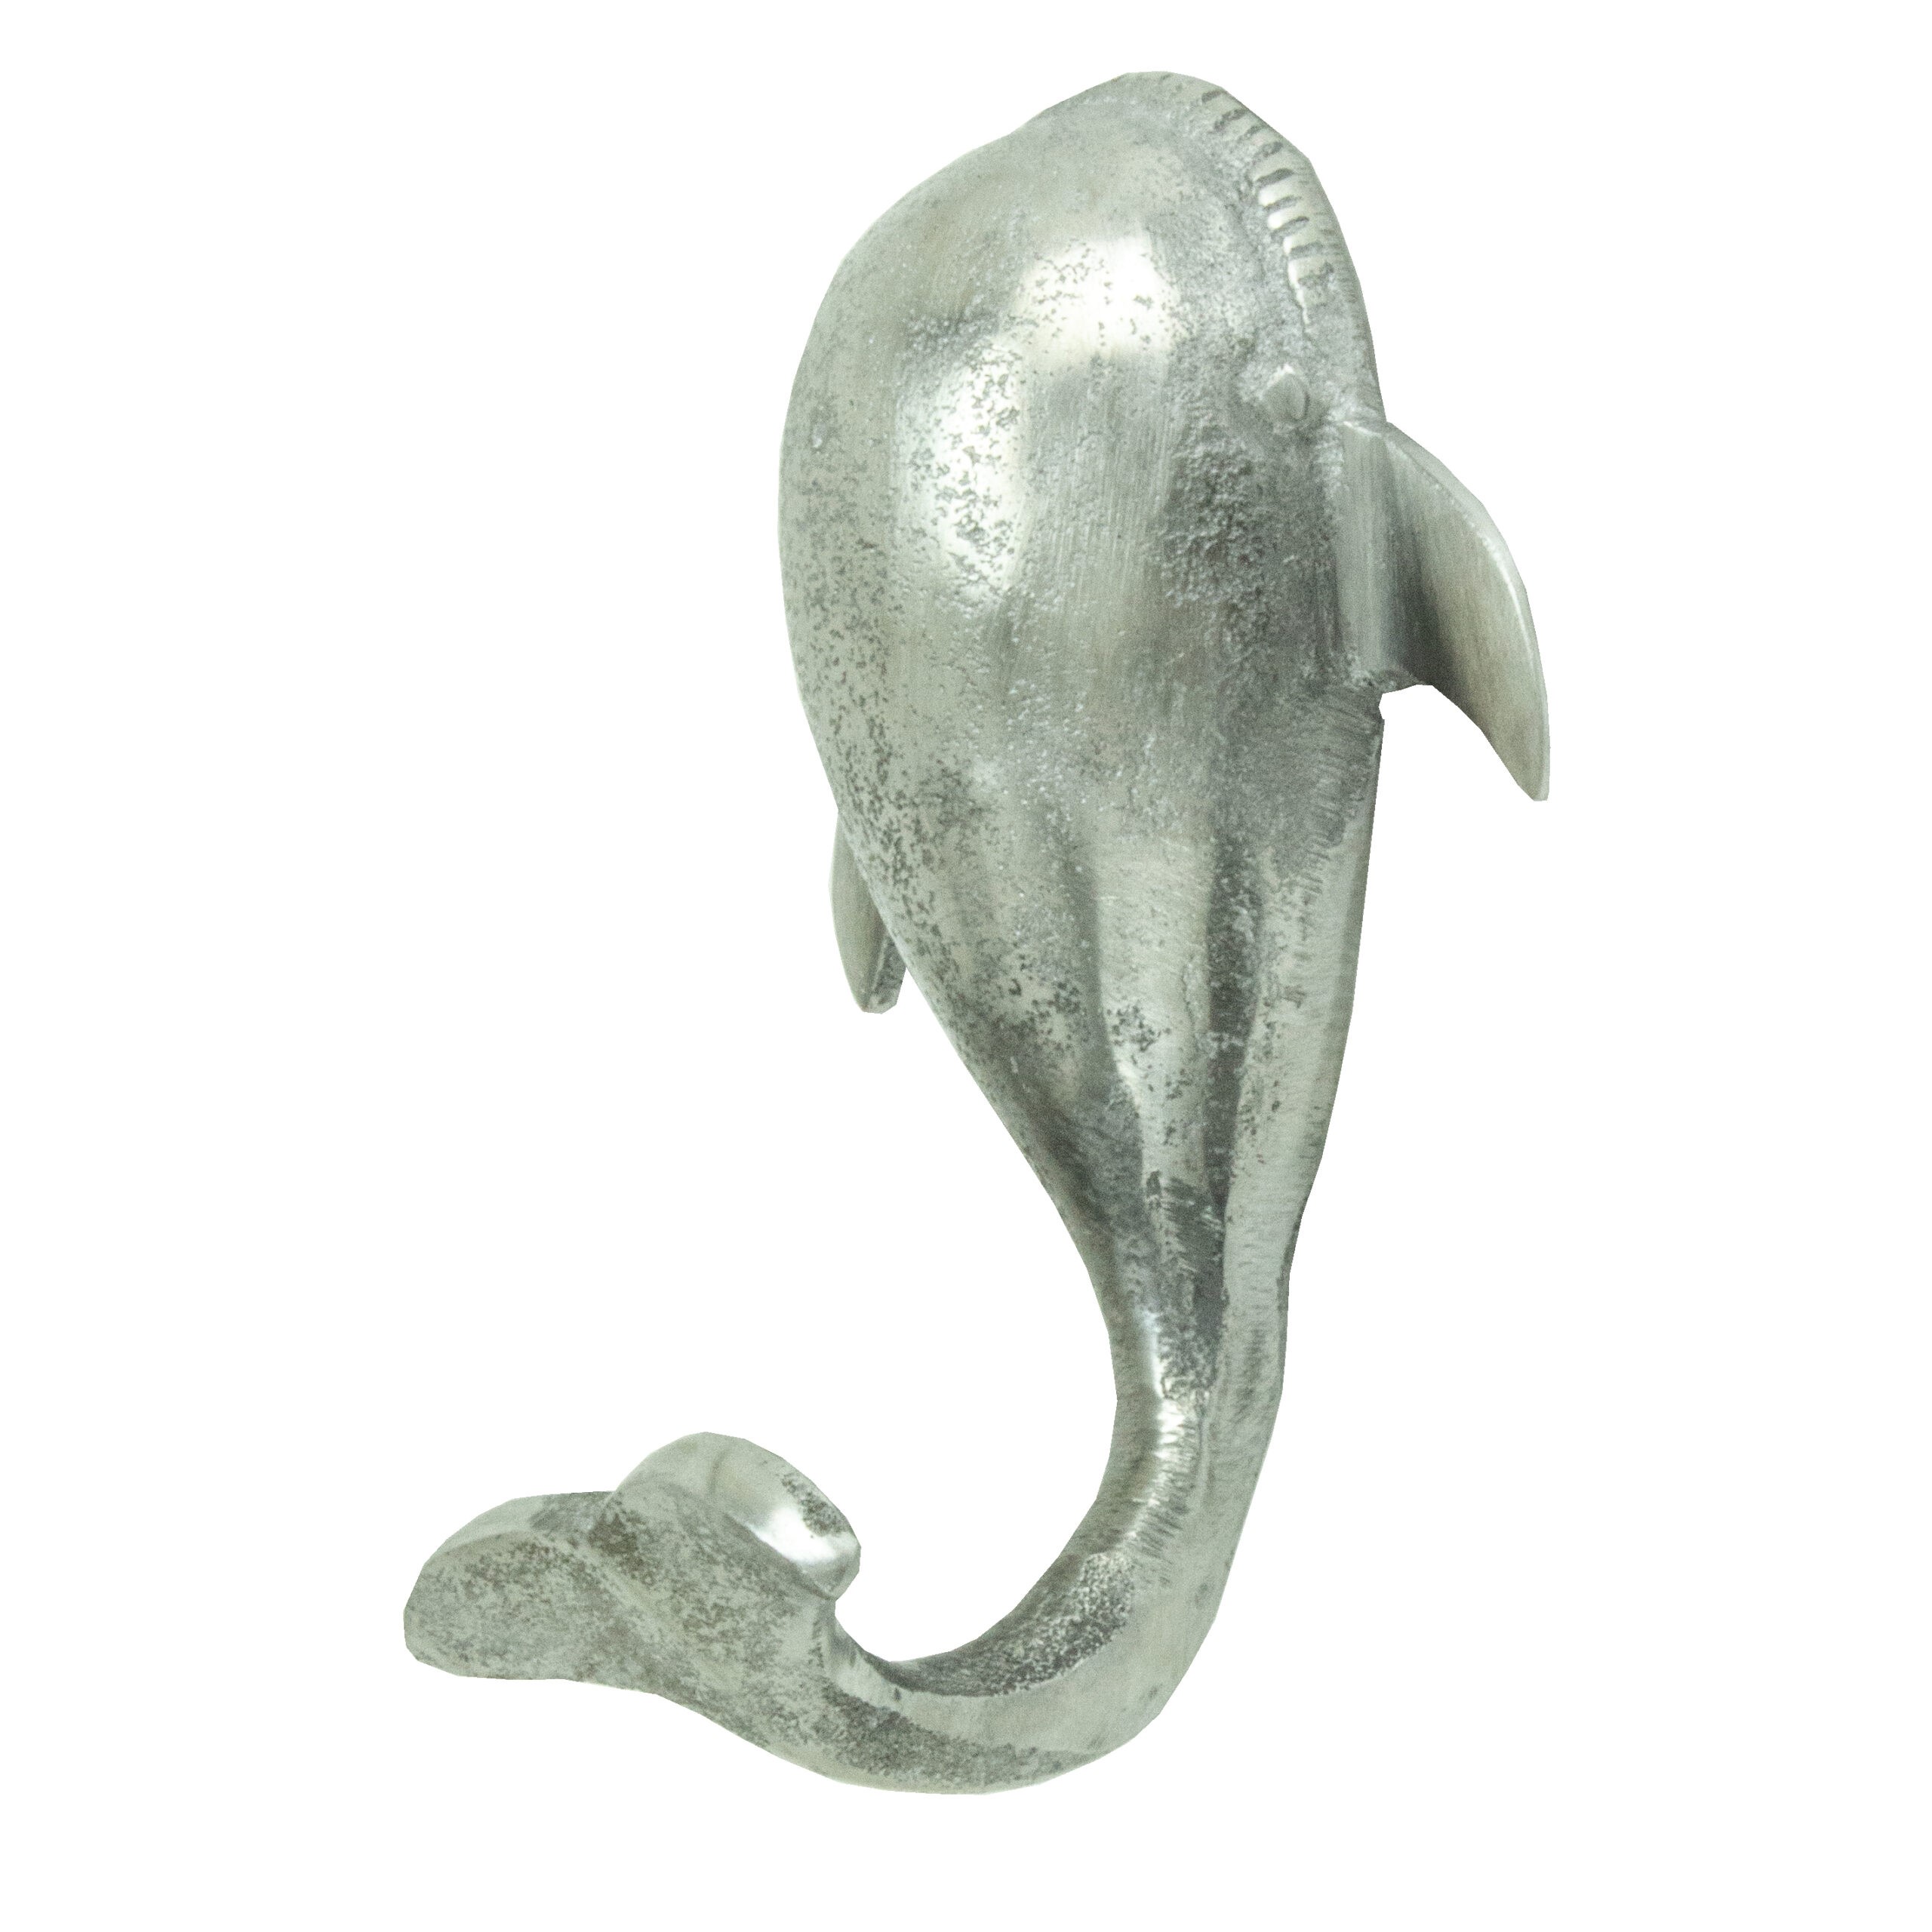 https://www.saltyhome.com/wp-content/uploads/2022/06/Silver-whale-wall-hook-nautical-nursery-accessory-new-england-fish-mal-248.jpg